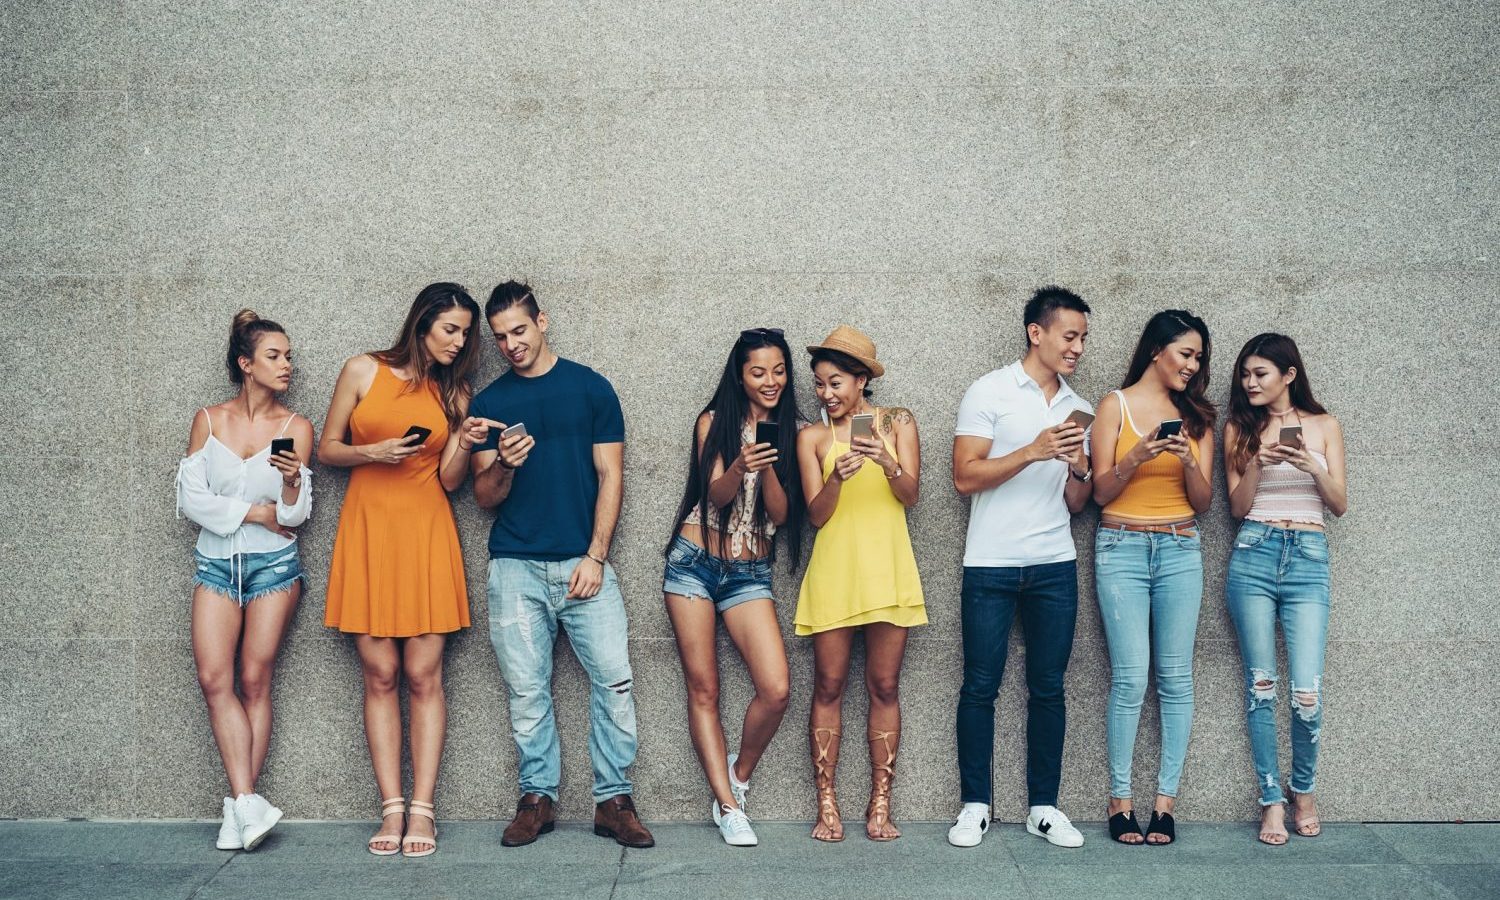 Gen Z And Millennial Cannabis Consumers Are Influenced By... Who? And What?